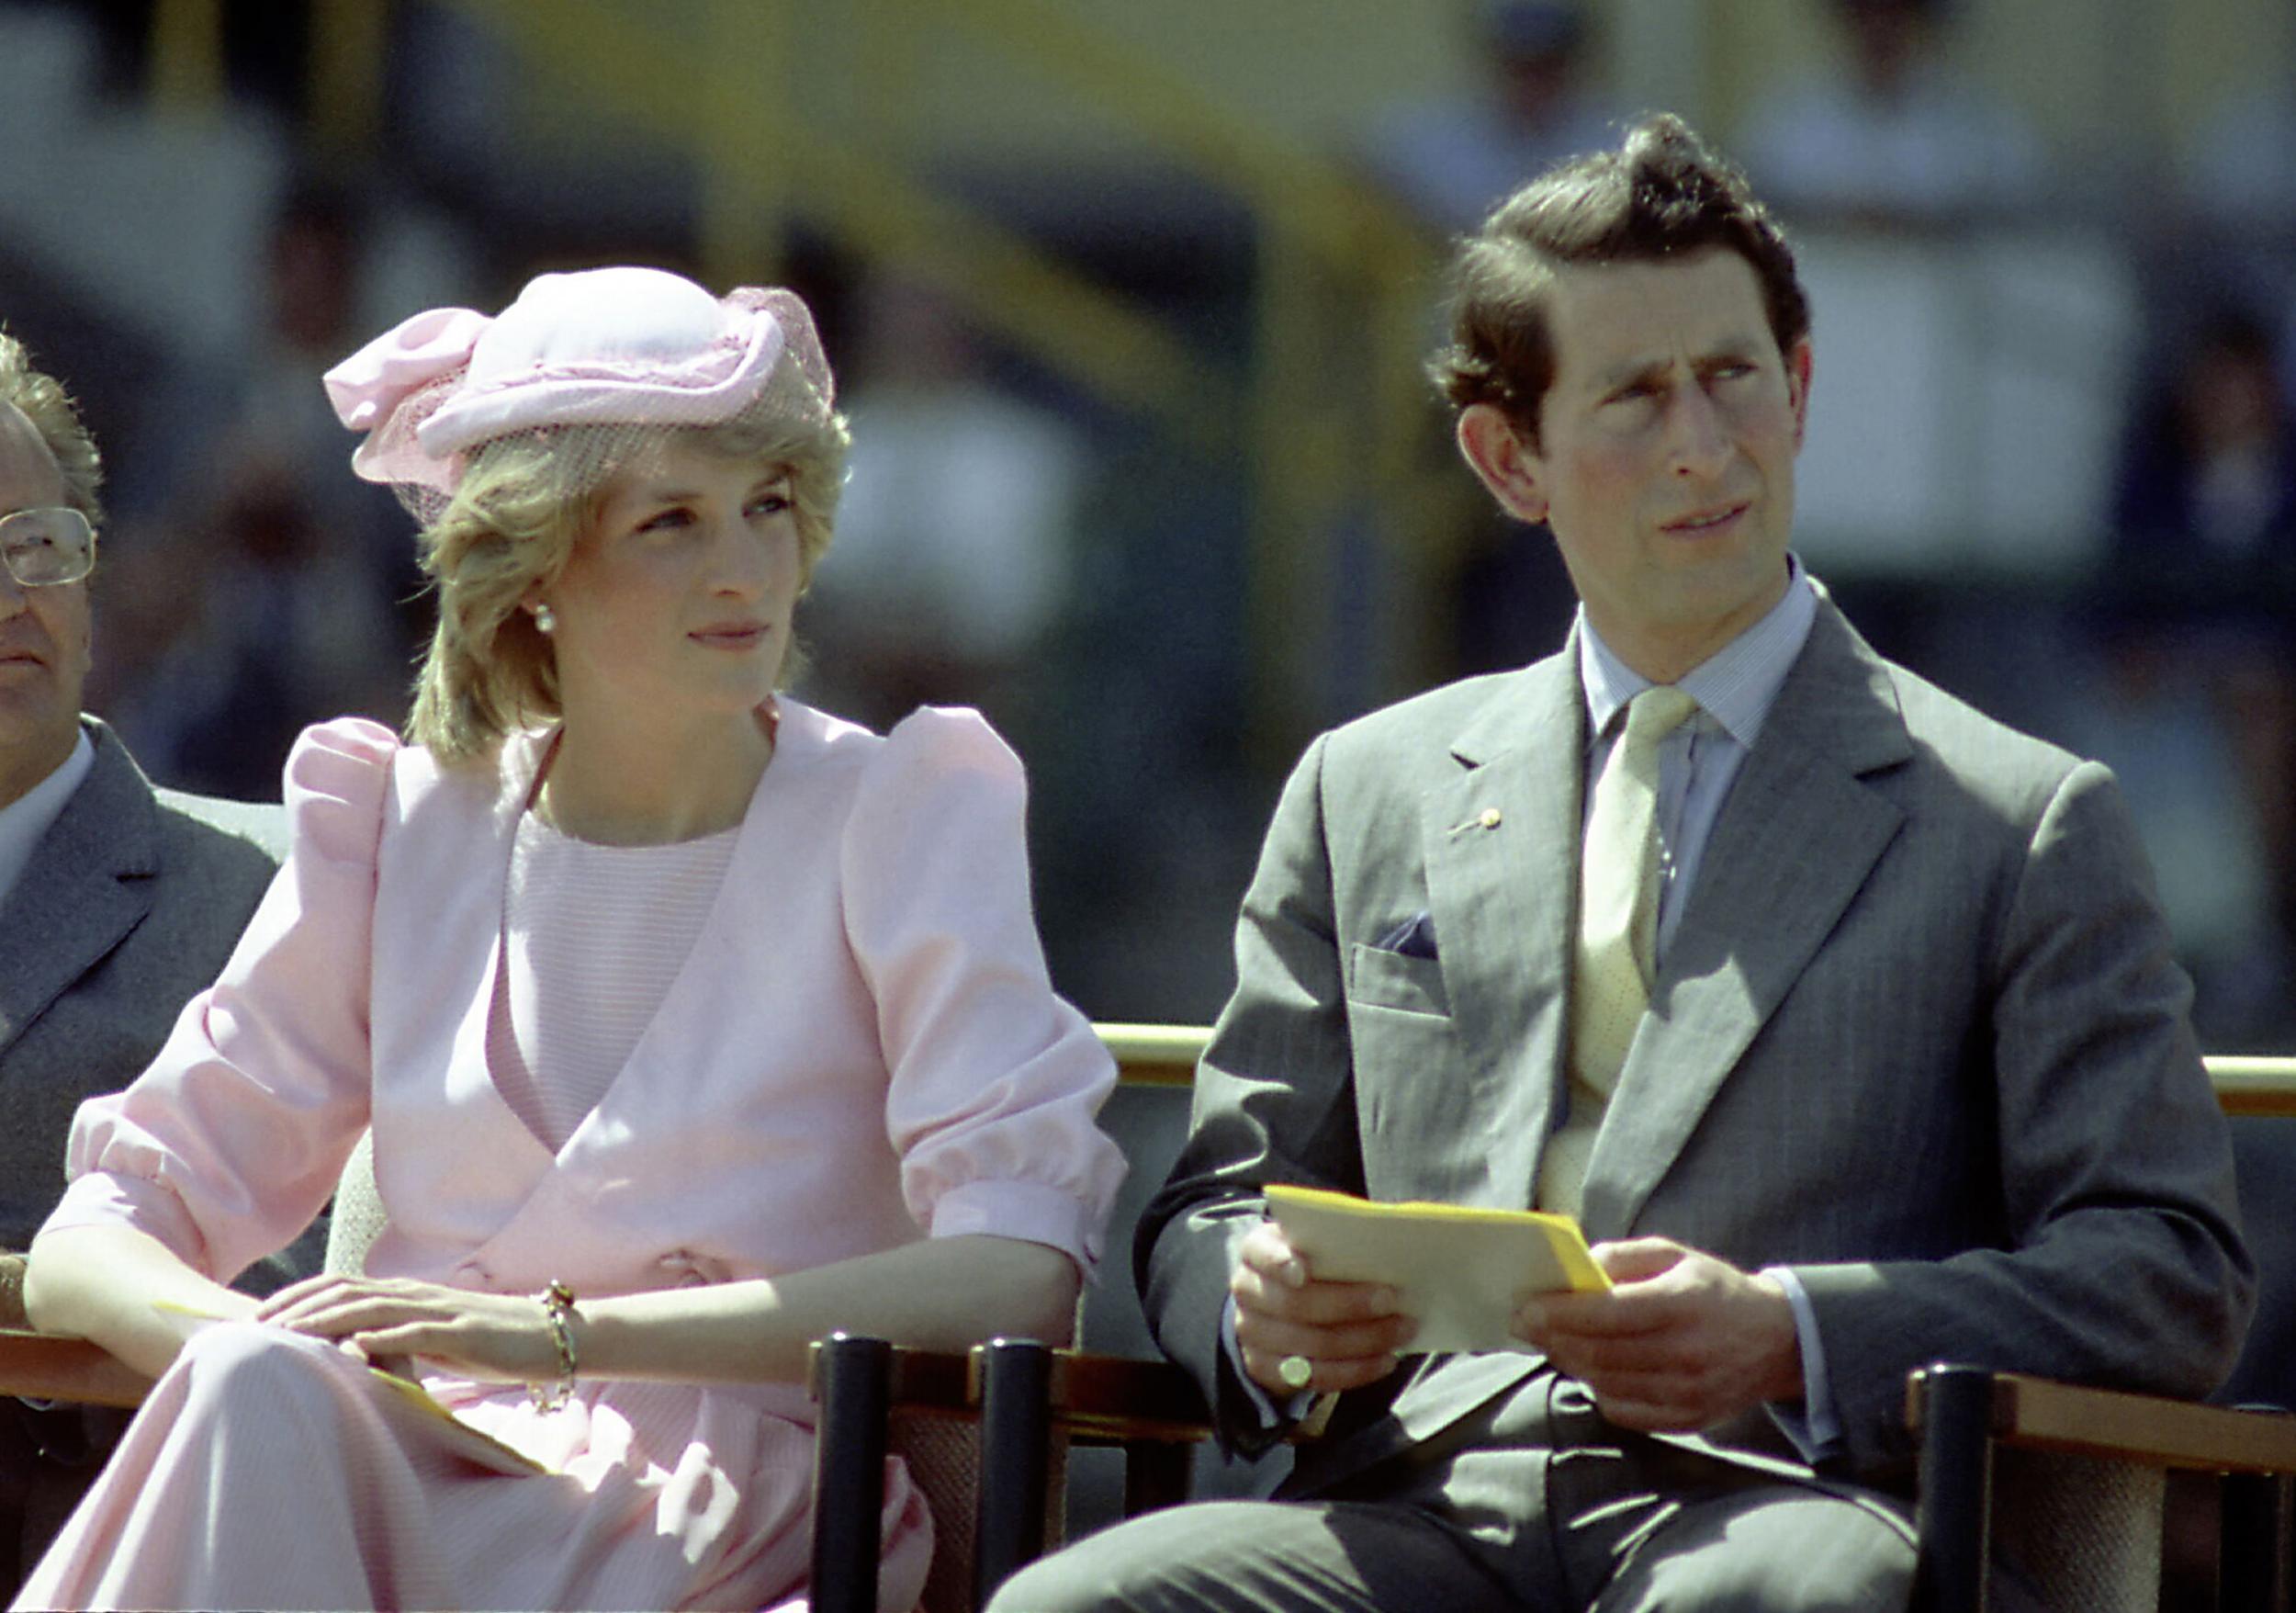 Intimate details about Diana's sex life with Prince Charles are recorded on the tapes